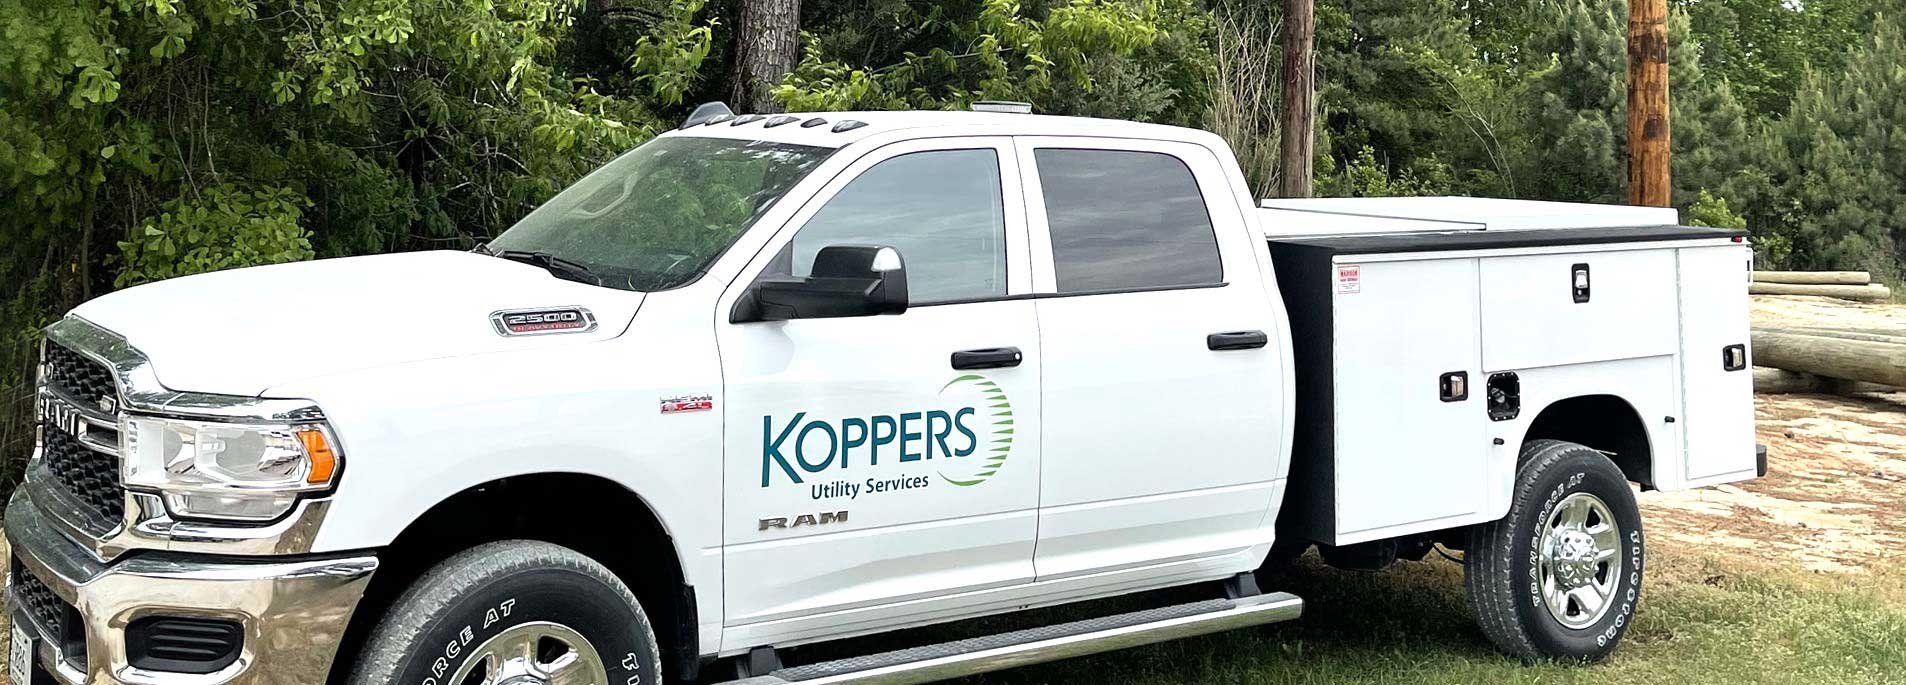 Koppers Utility Services Truck